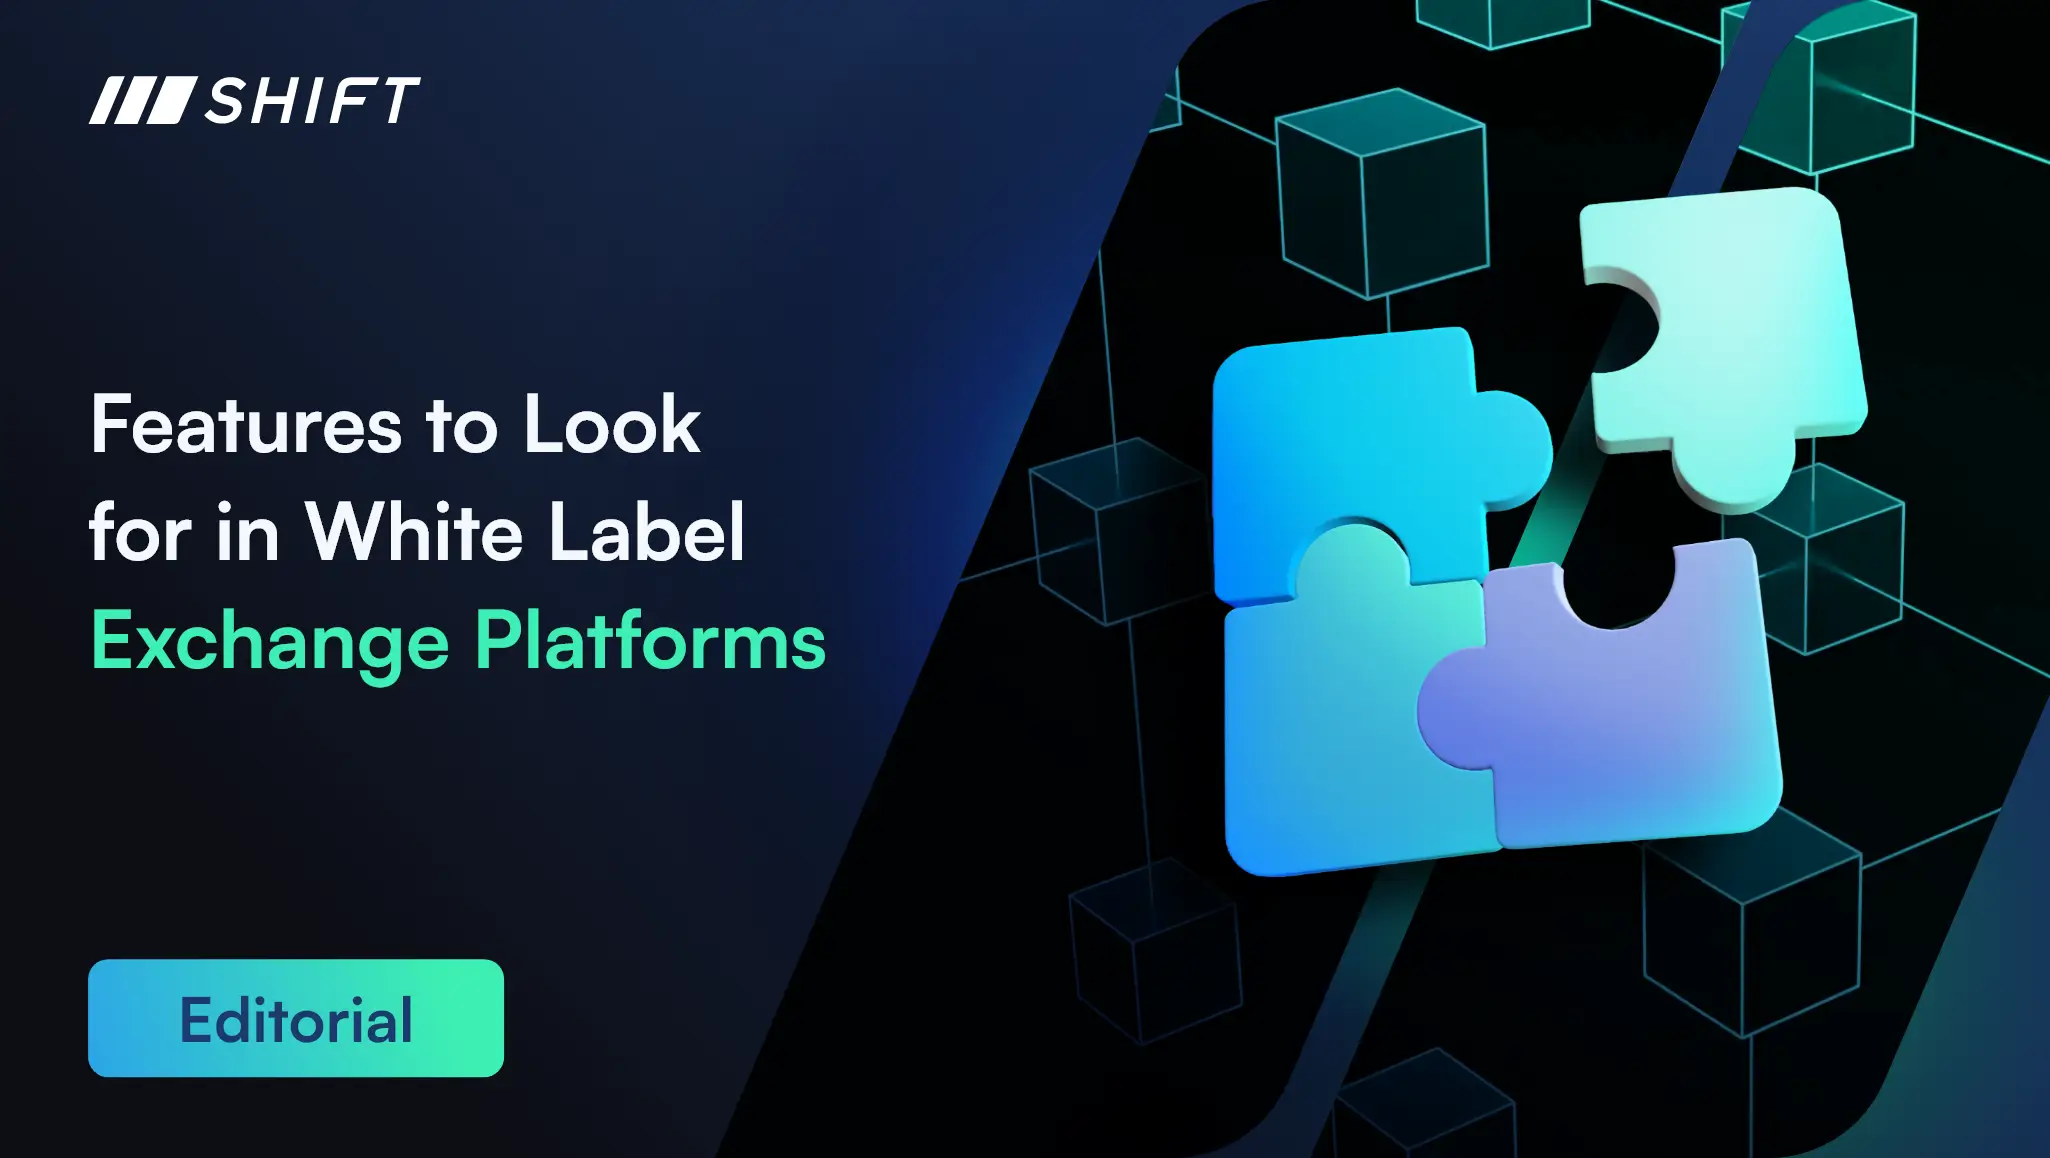 Features to Look for in White Label Exchange Platforms